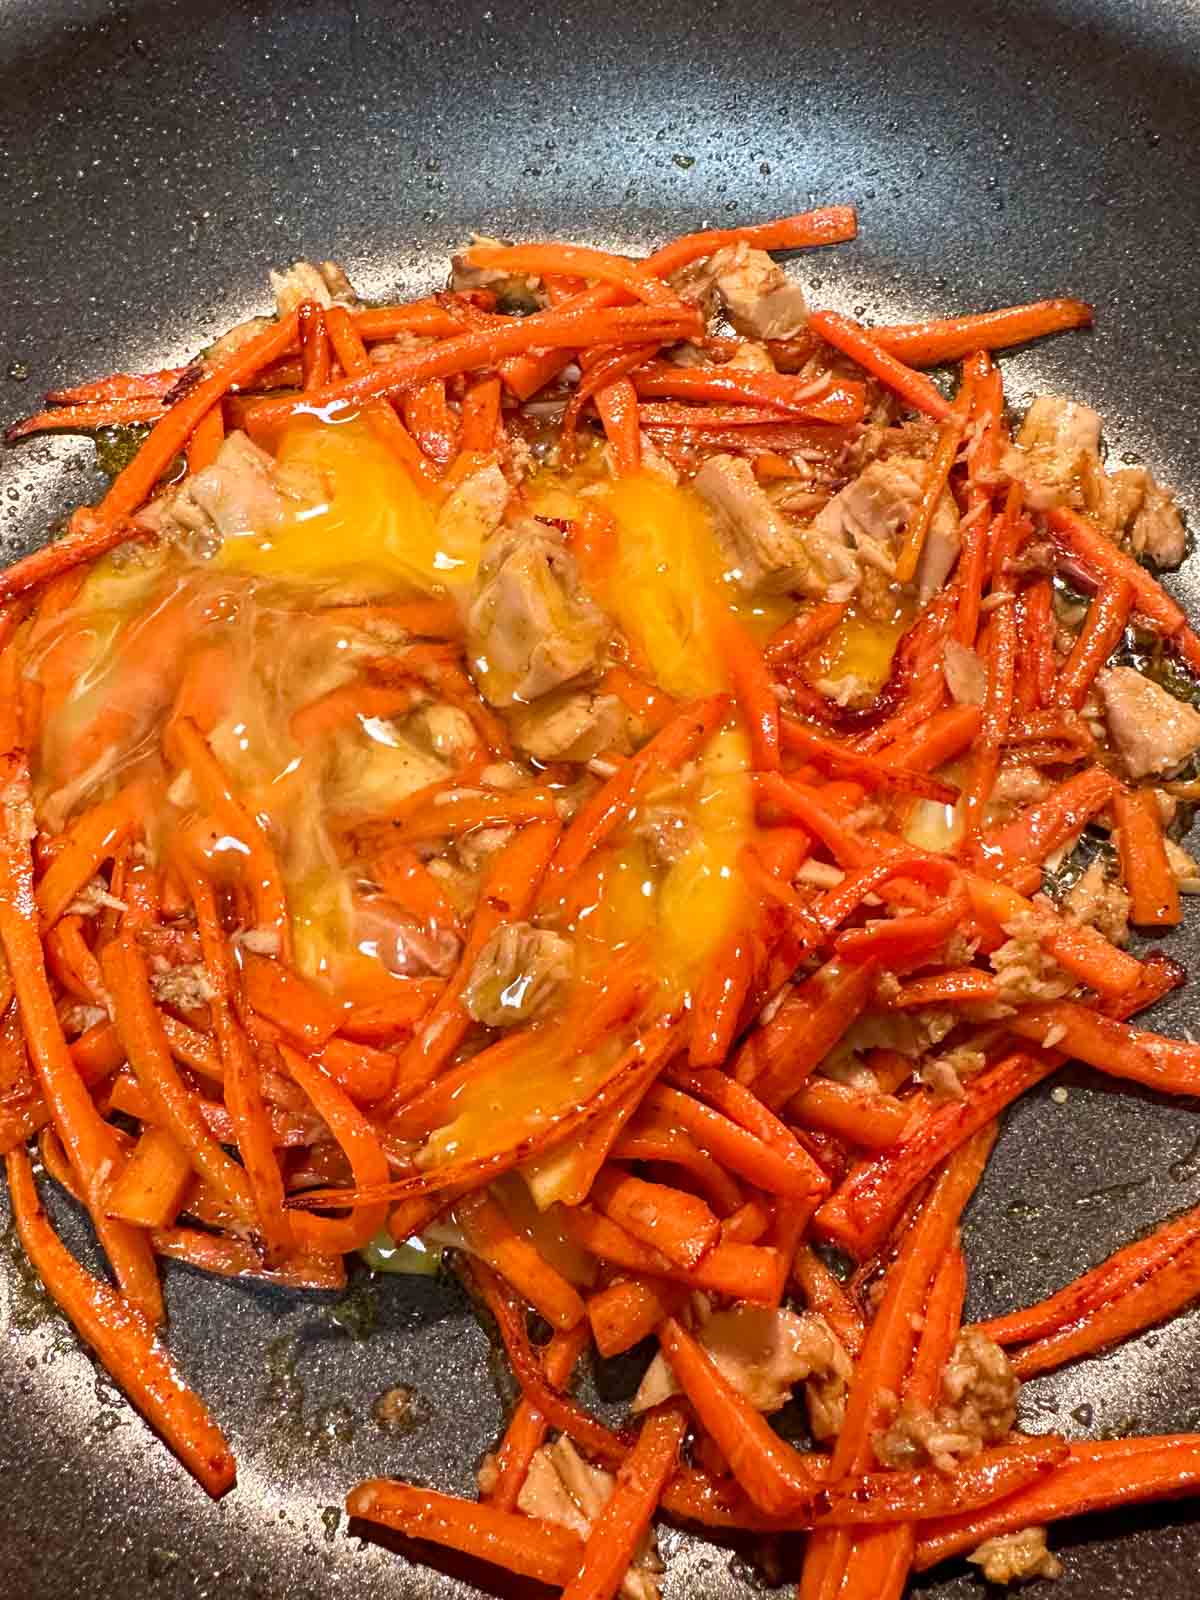 Julienned carrots cooked with tuna, seasonings, and whisked egg in a skillet.